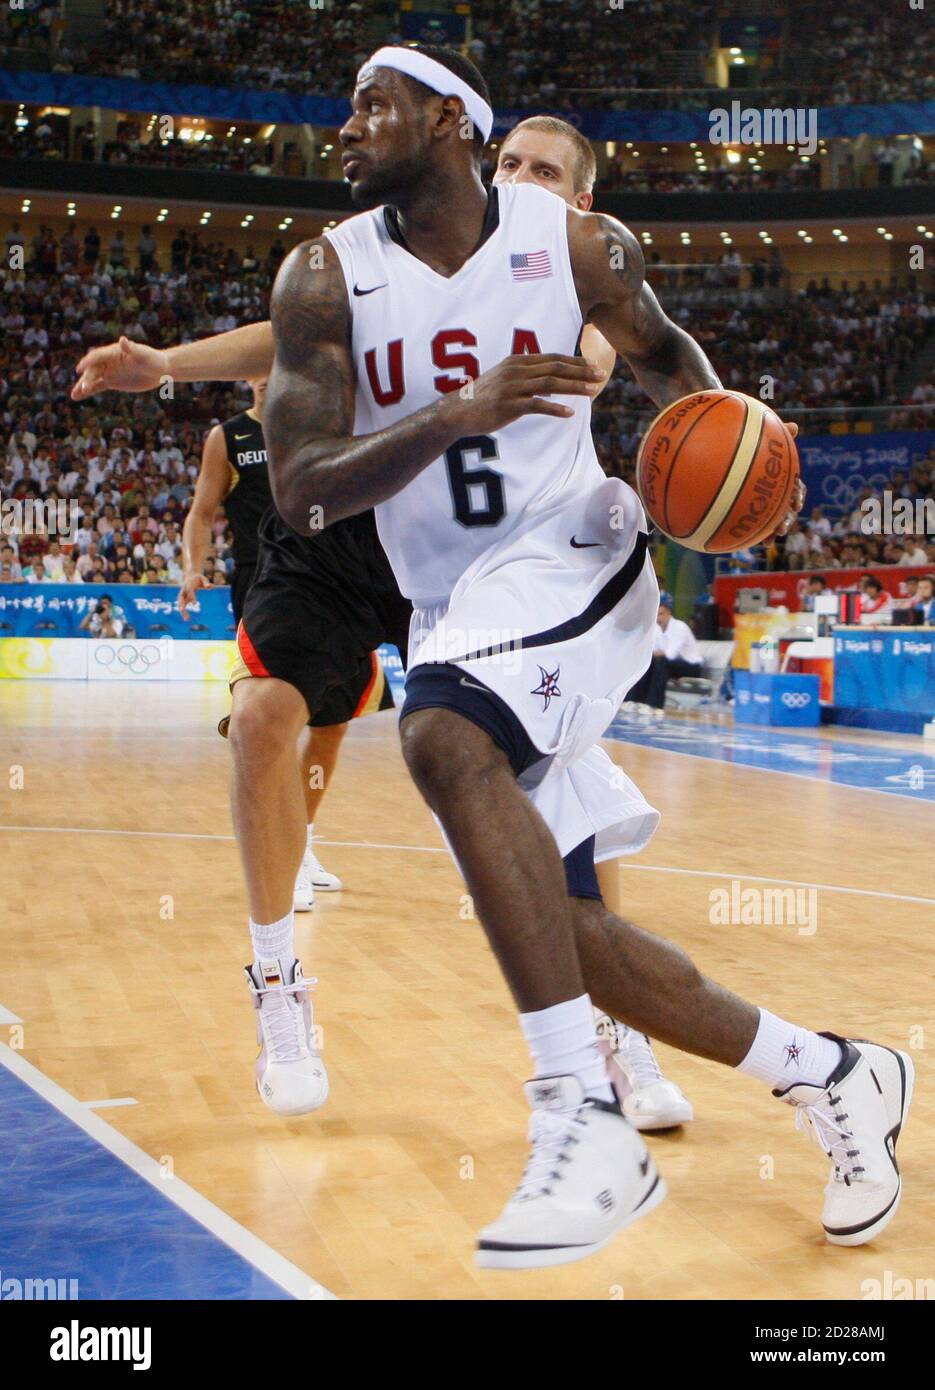 Lebron James of the . (R) drives to the basket past Dirk Nowitzki of  Germany during their men's Group B basketball game at the Beijing 2008  Olympic Games August 18, 2008. REUTERS/Lucy